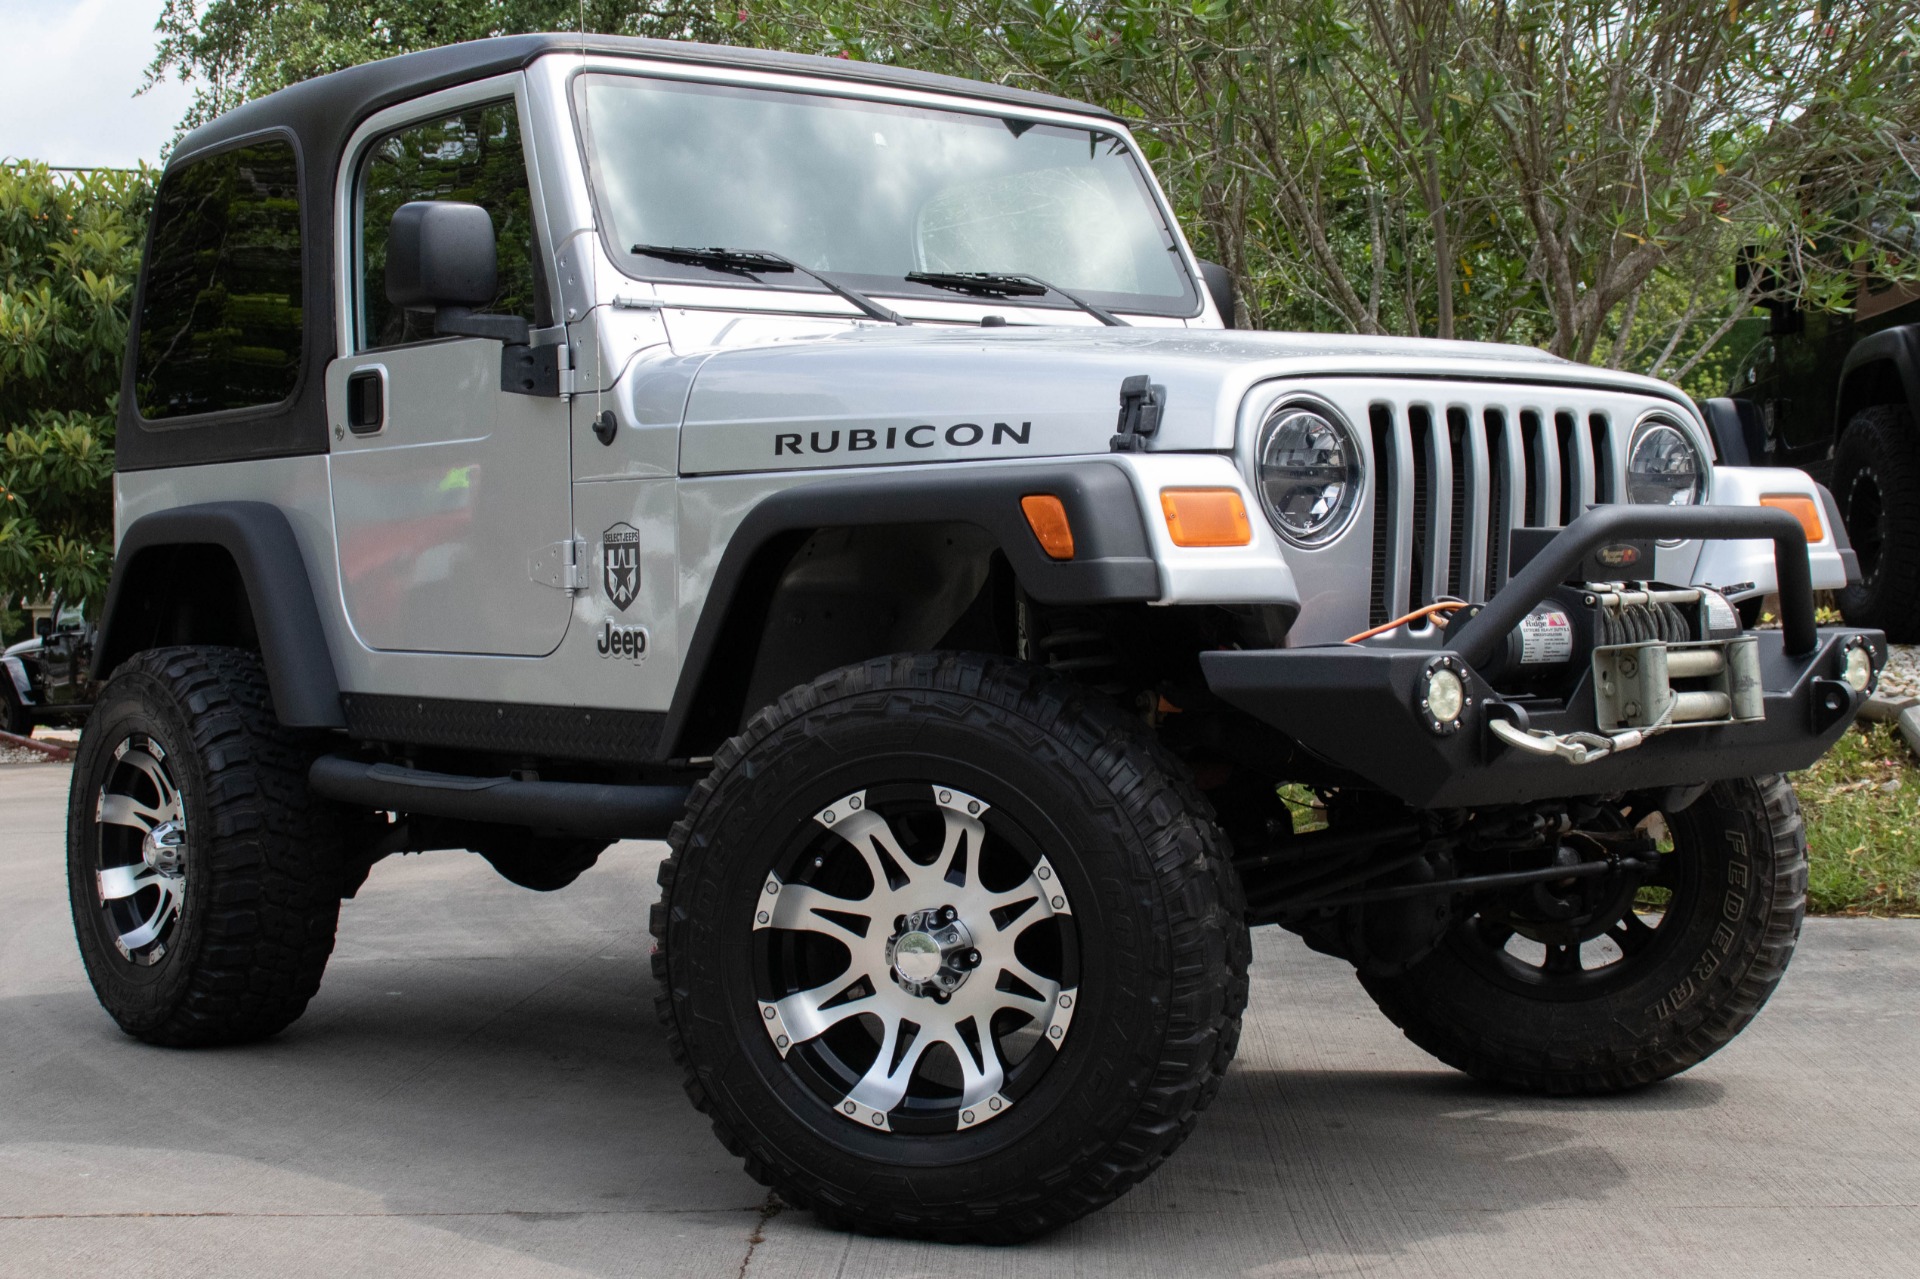 Used 2004 Jeep Wrangler Rubicon For Sale ($23,995) | Select Jeeps Inc.  Stock #764595